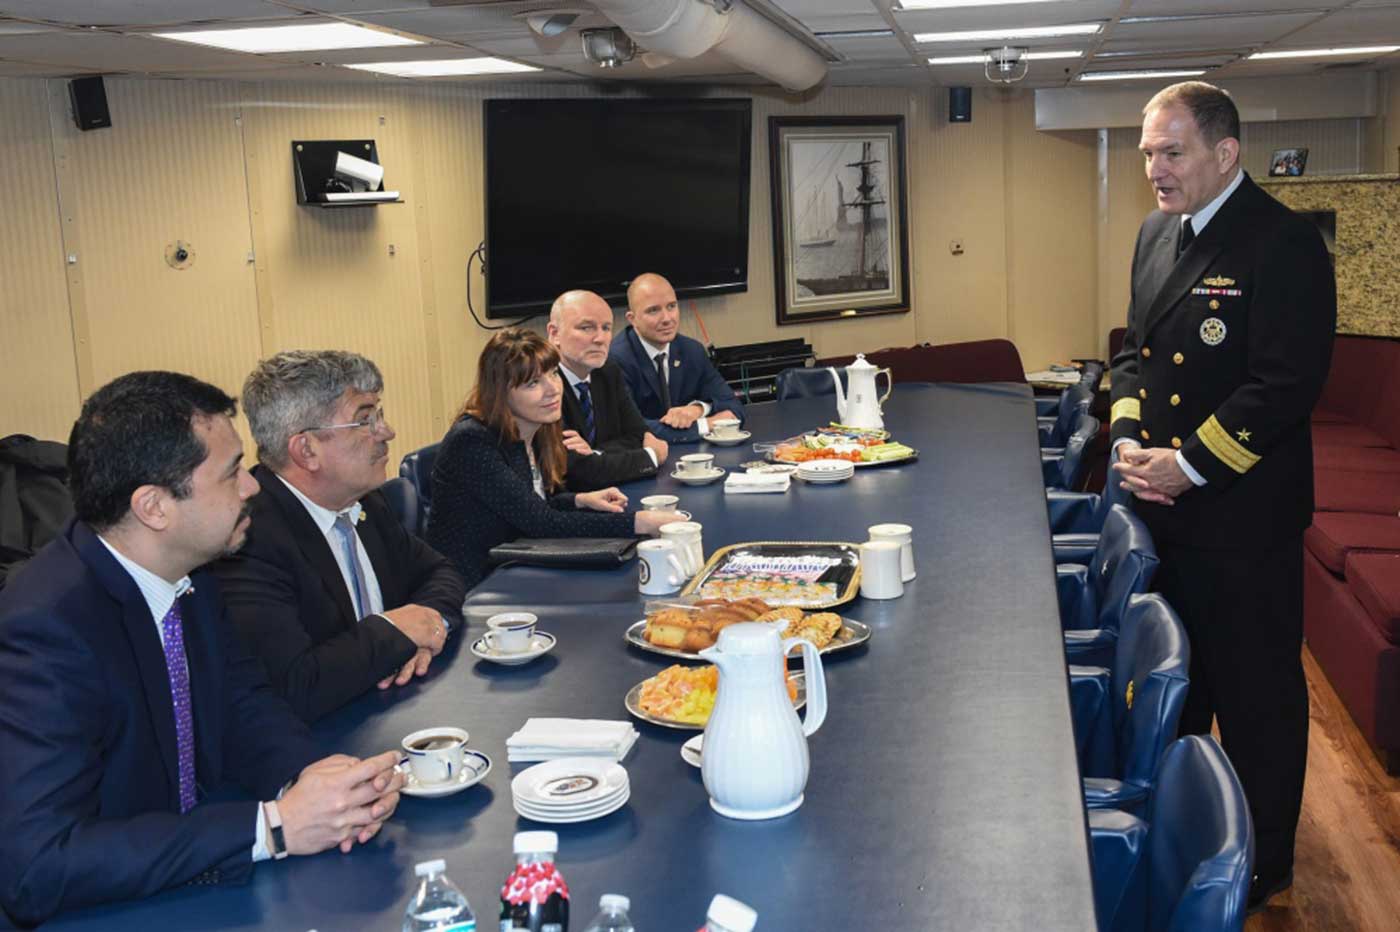 Rostock, Germany (Mar. 4, 2019) Rear Adm. Edward Cashman, commander of Standing Maritime Group One (SNMG 1) speaks to Consul General Yoneoka and other distinguished visitors from Hamburg and Rostock, Germany during a tour aboard the guided-missile destroyer USS Gravely (DDG 107). Gravely is underway on a regularly-scheduled deployment as the flagship of Standing NATO Maritime Group 1 to conduct maritime operations and provide a continuous maritime capability for NATO in the northern Atlantic -- U.S. Navy photo by MCS 2nd Class Mark Andrew Hays. -